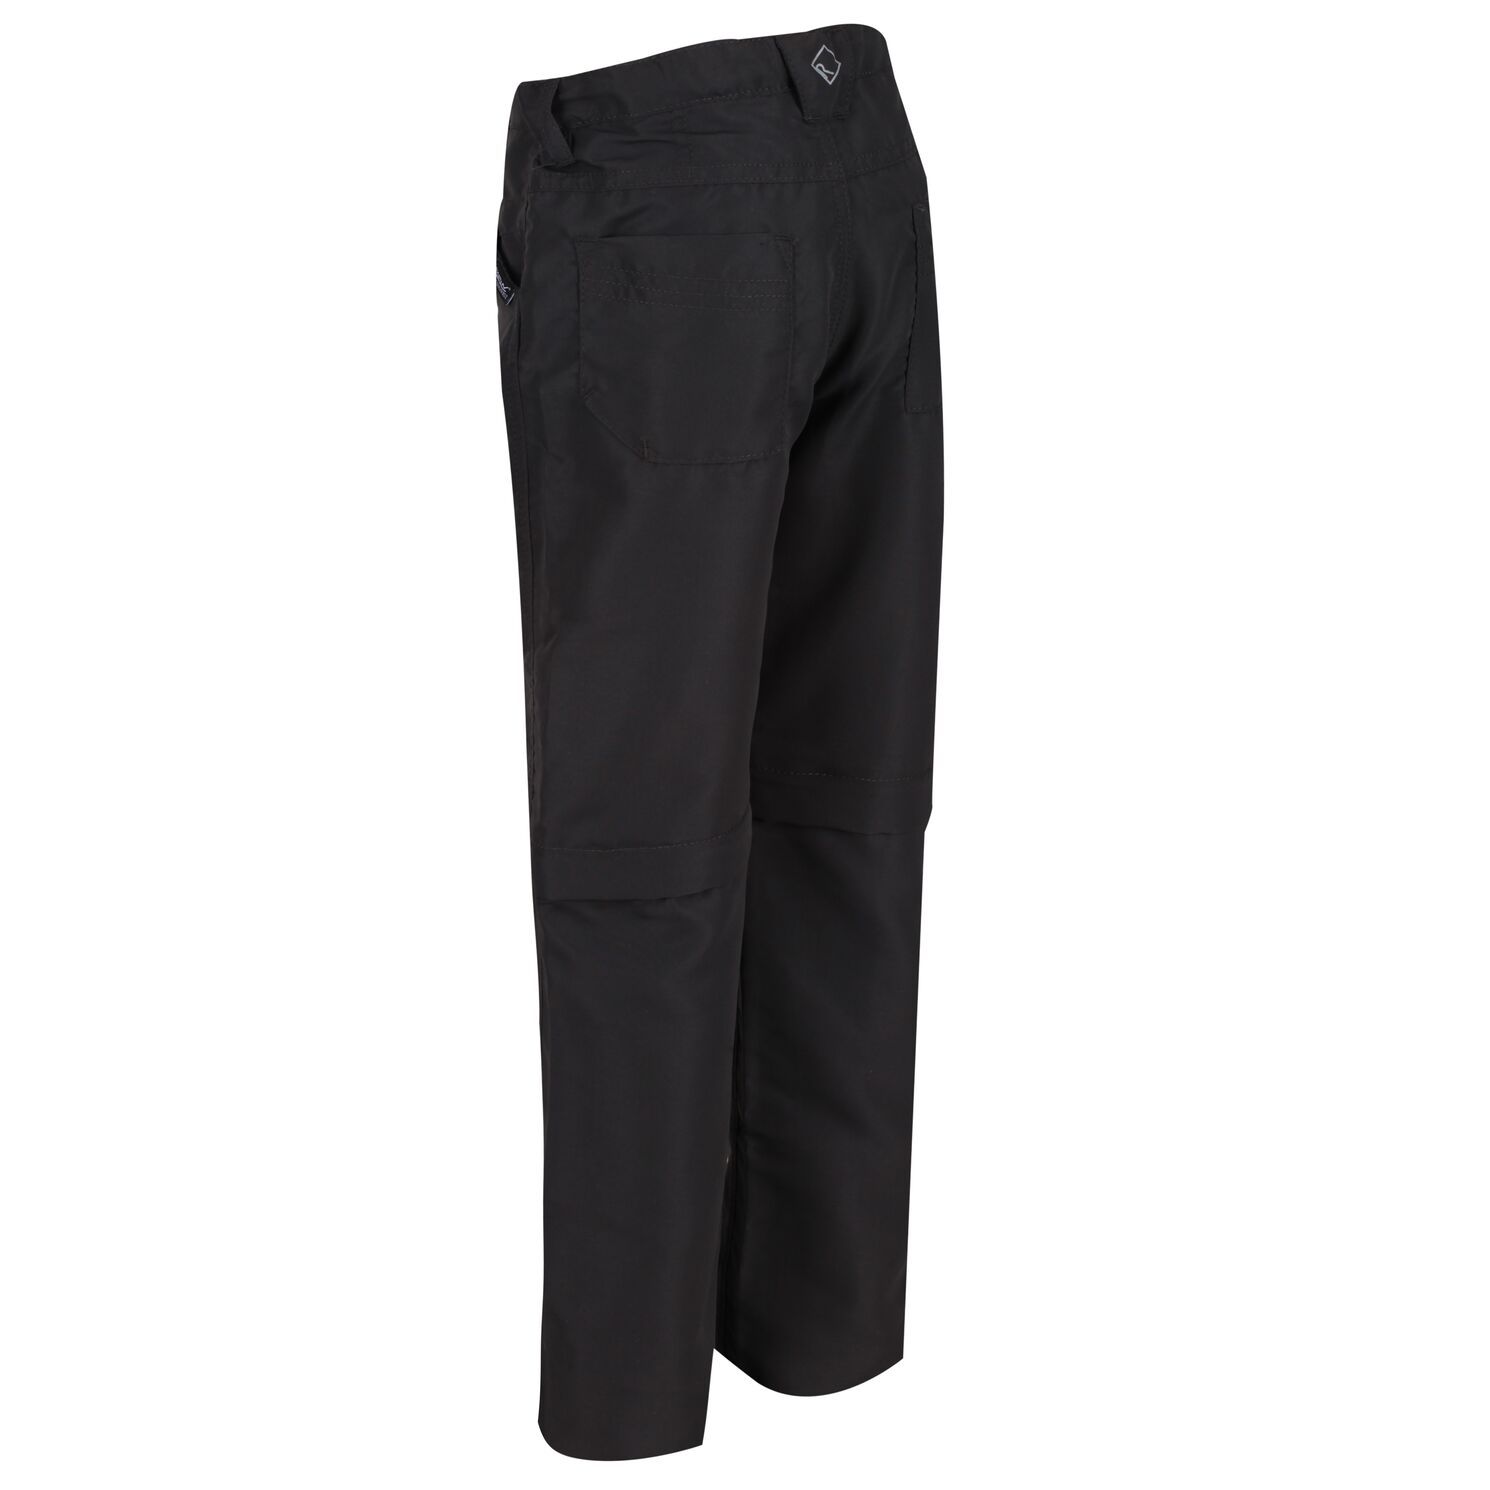 Material: 100% Polyester. Durable, water repellent and lightweight trousers with zip-off legs which convert them into shorts. Part-elasticated waist with button adjustment system. Multi pocketed. Ideal for day trips in changeable weather and overnight stays.